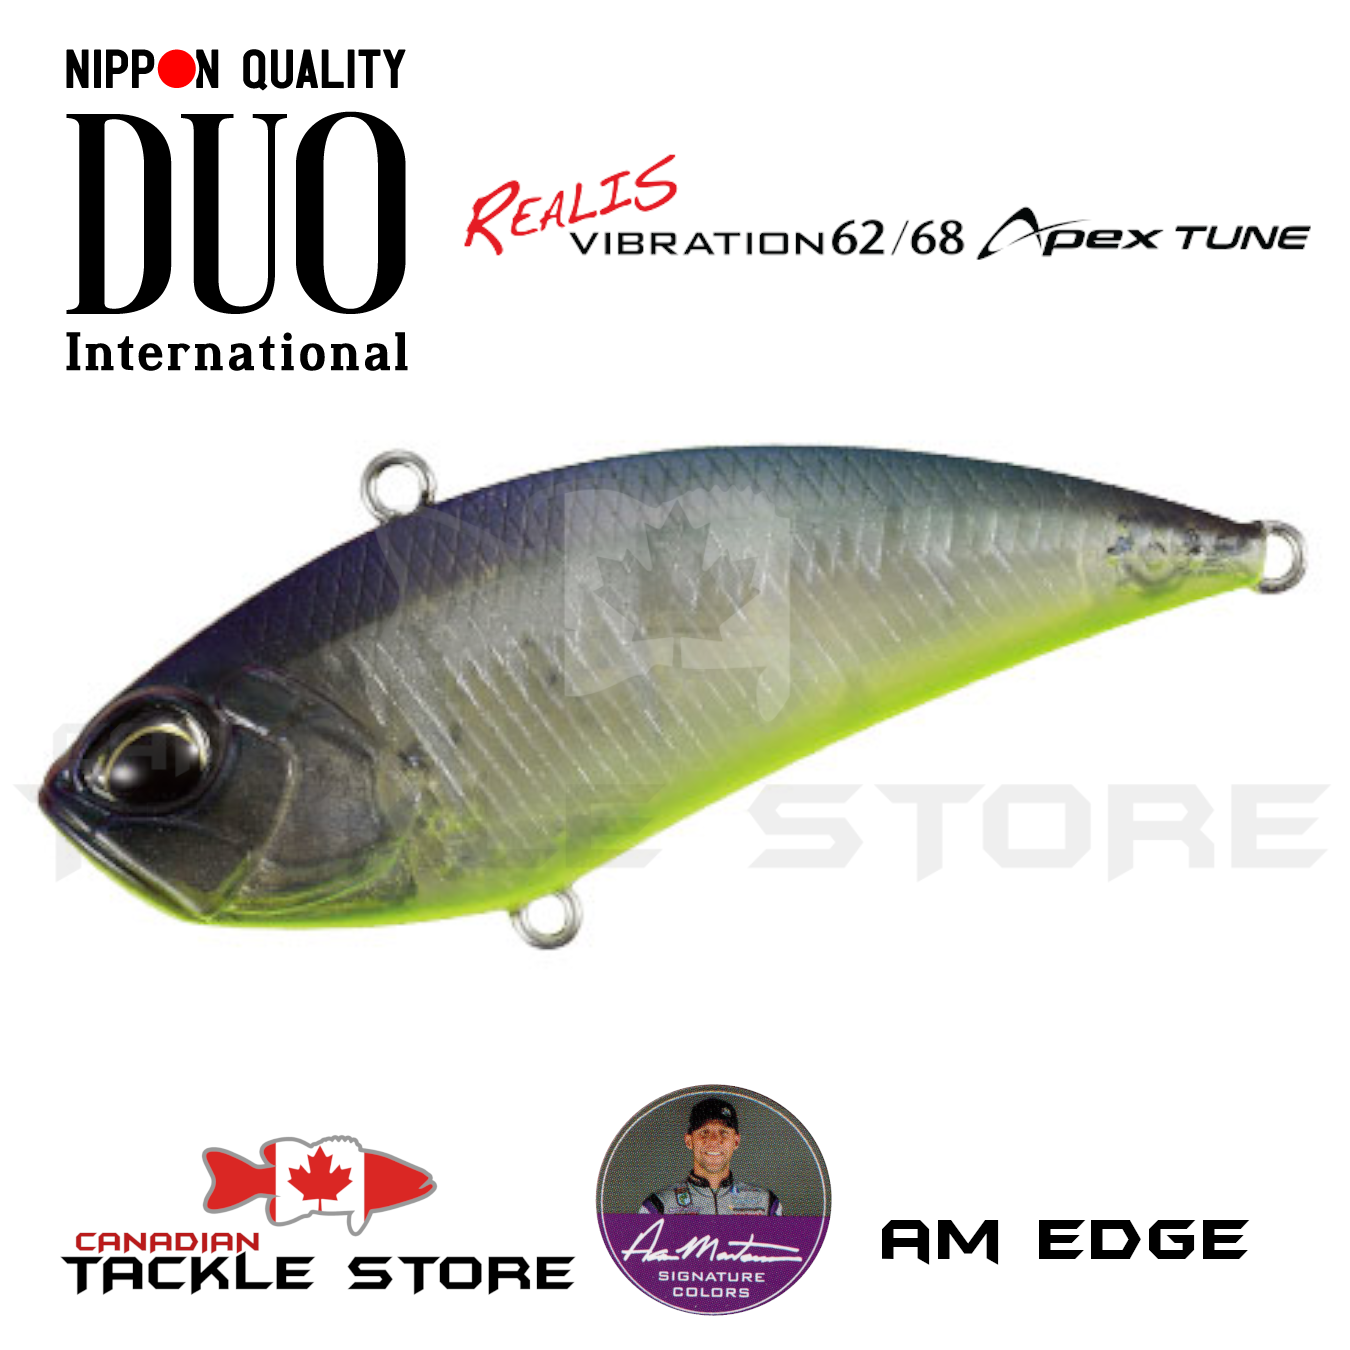 Duo Realis Vibration 62/68 Apex Tune – Canadian Tackle Store